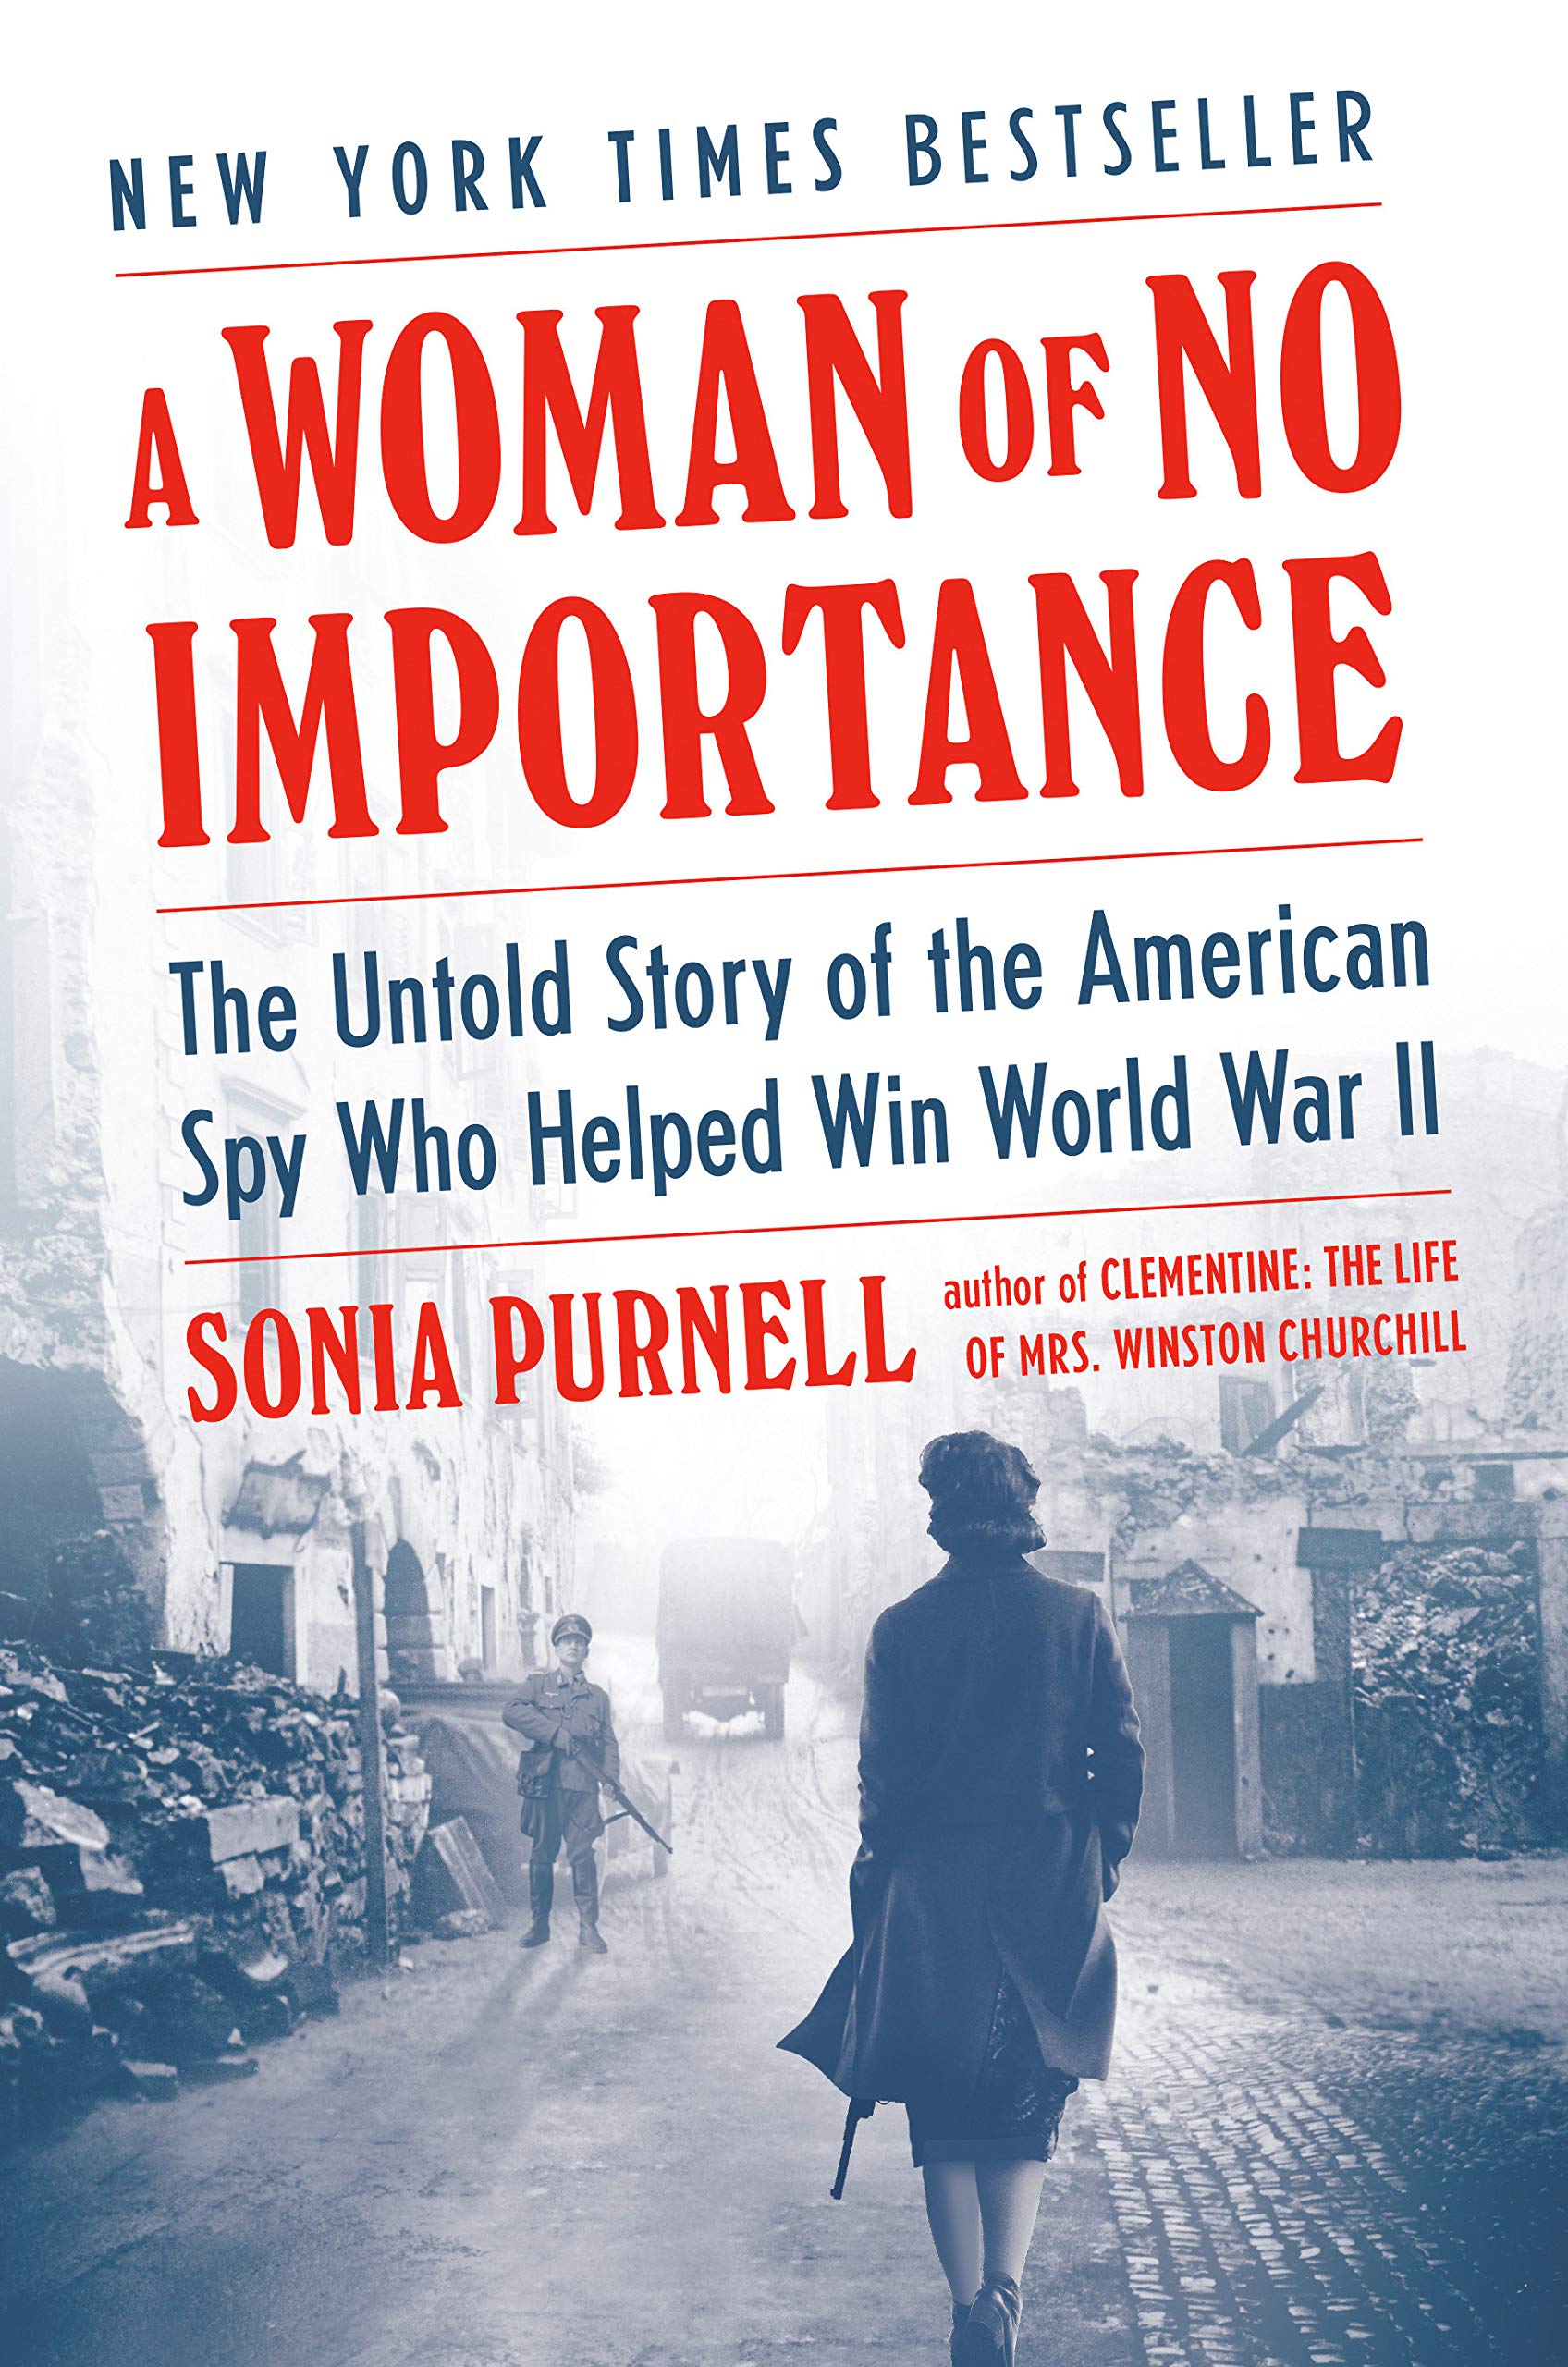 Cover of "A Woman of No Importance" by Sonia Purnell